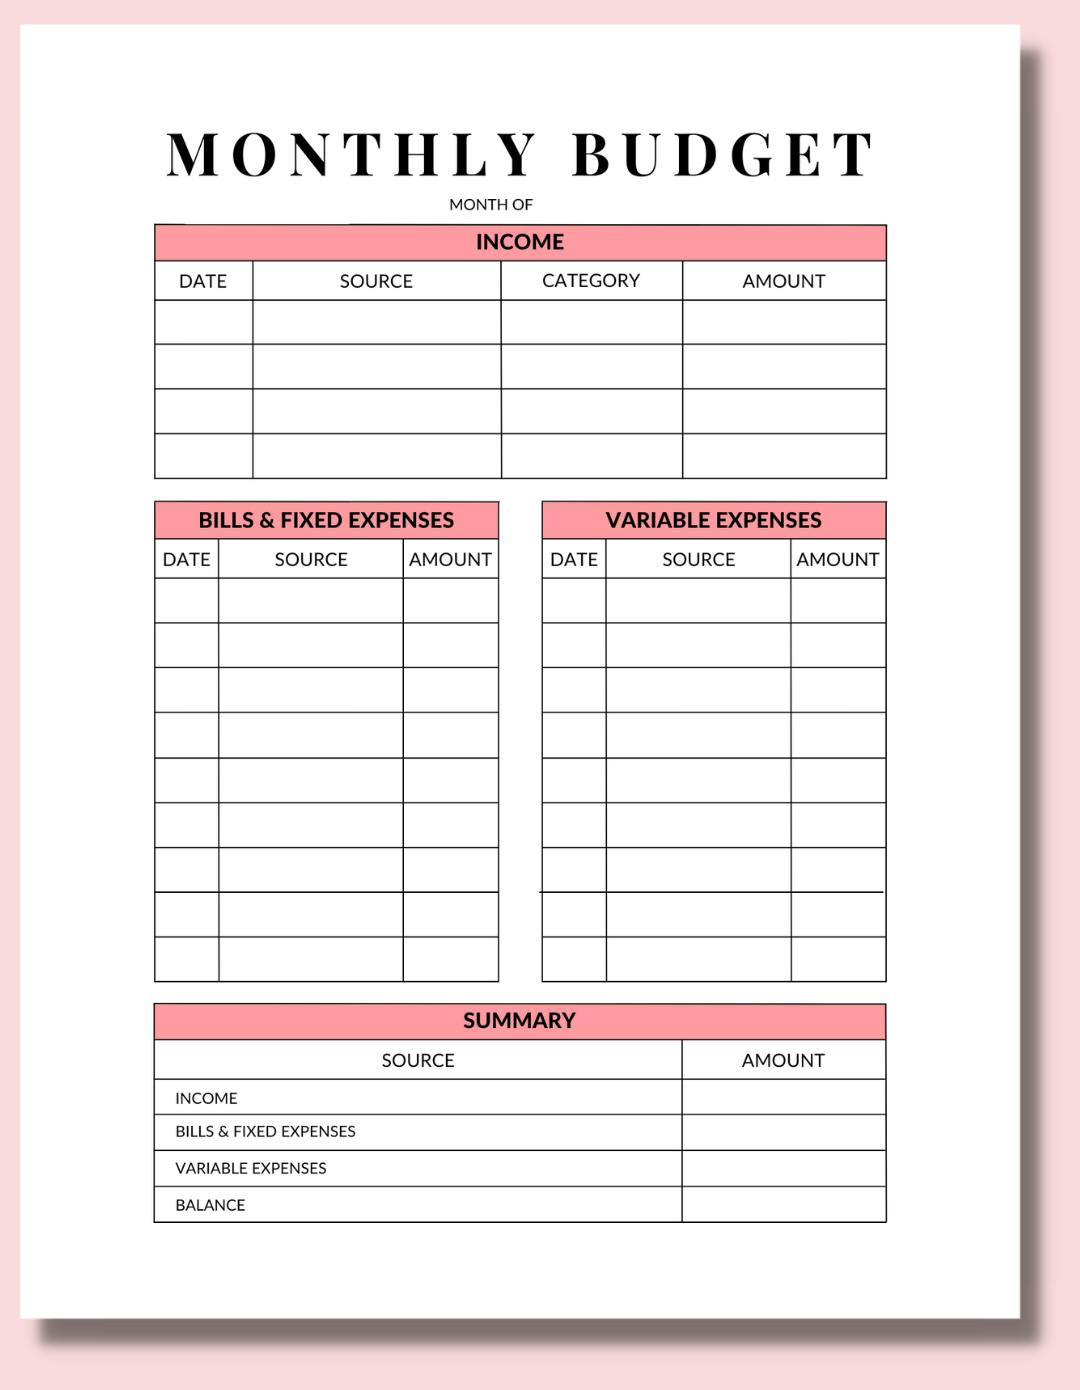 semi-monthly-budget-template-the-key-to-financial-success-in-2021